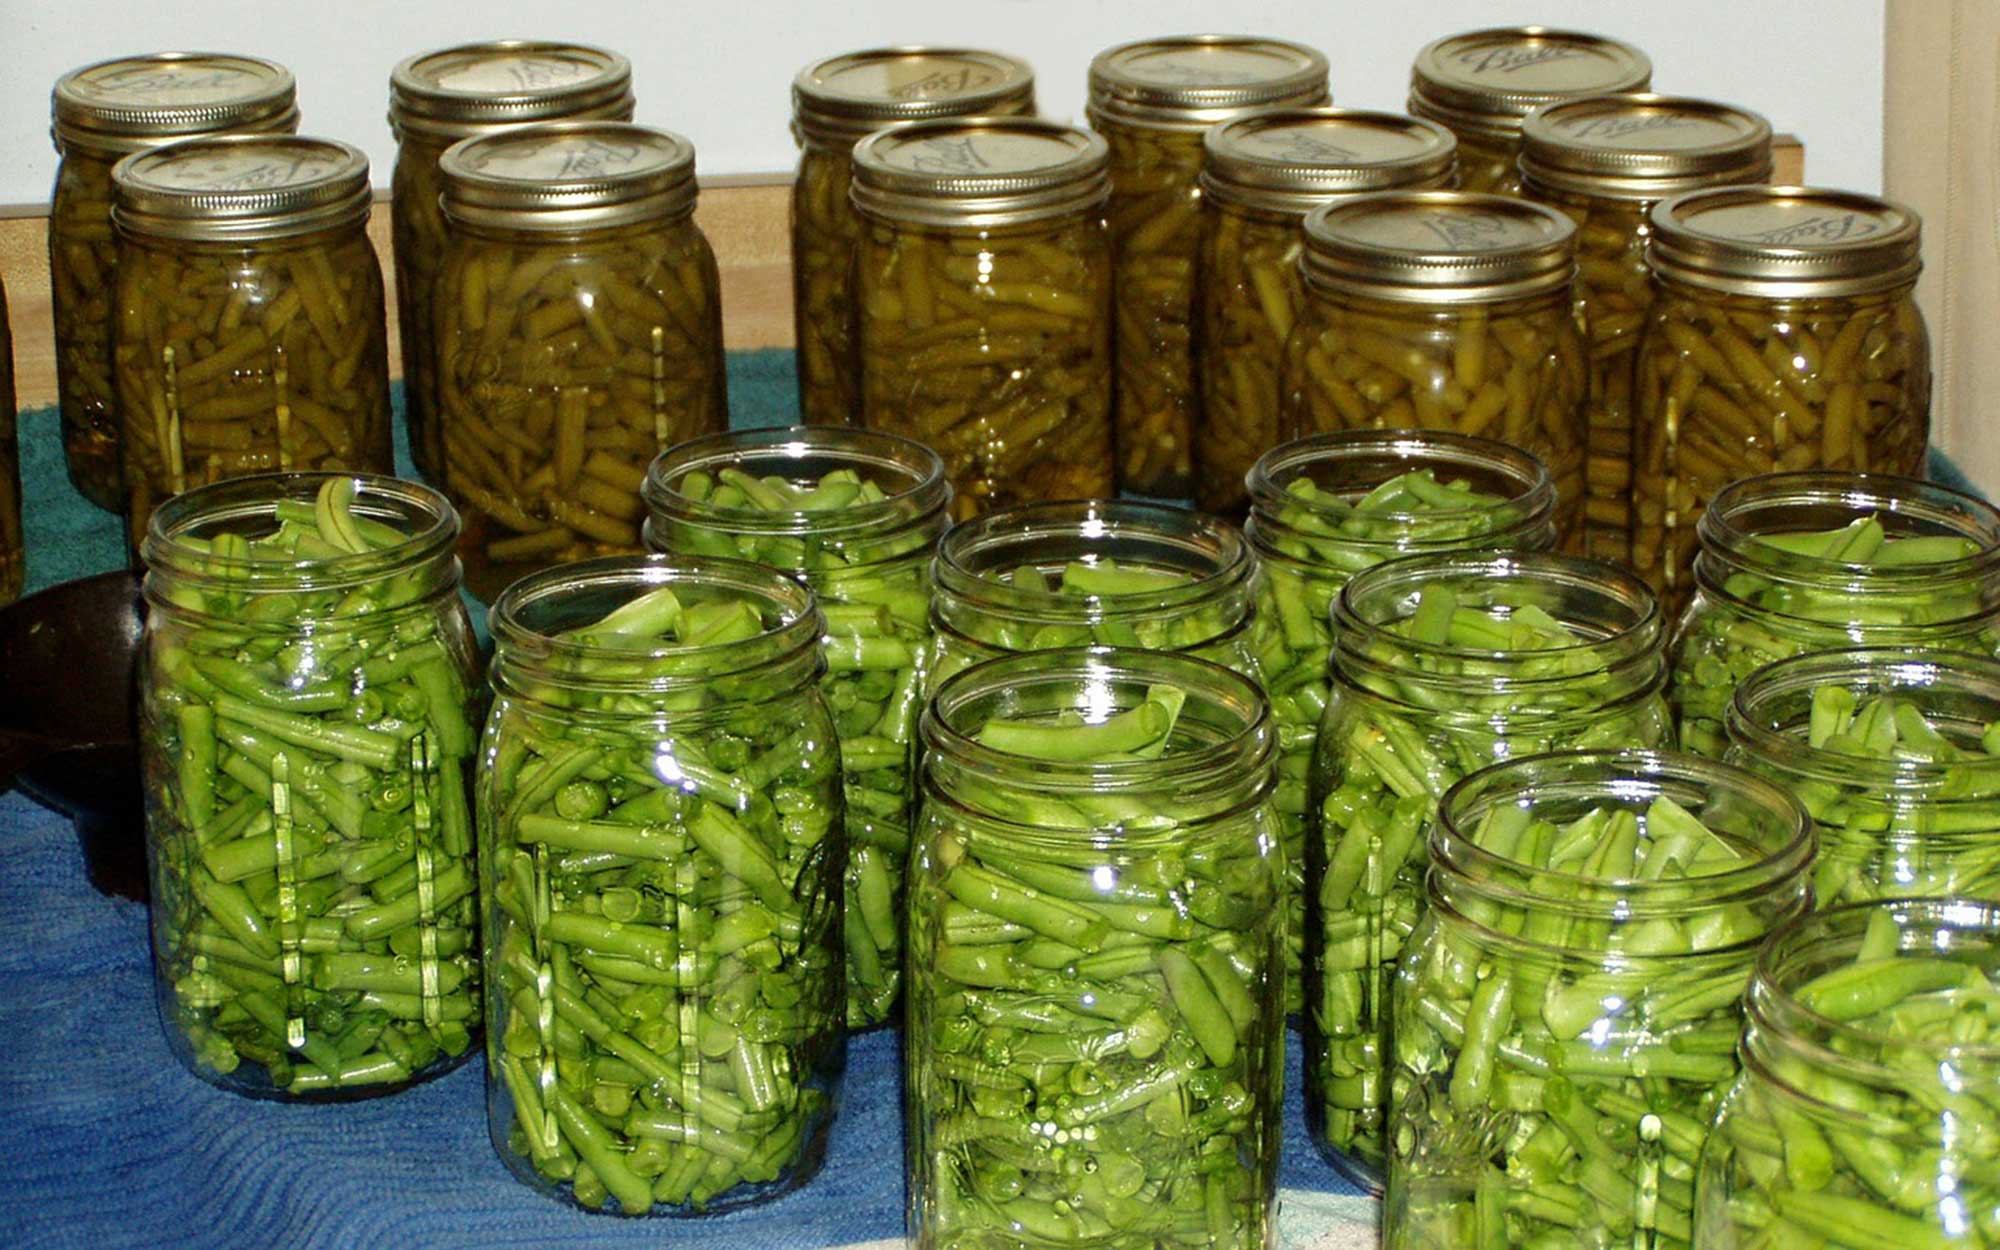 Several jars of canned green beans on a countertop.